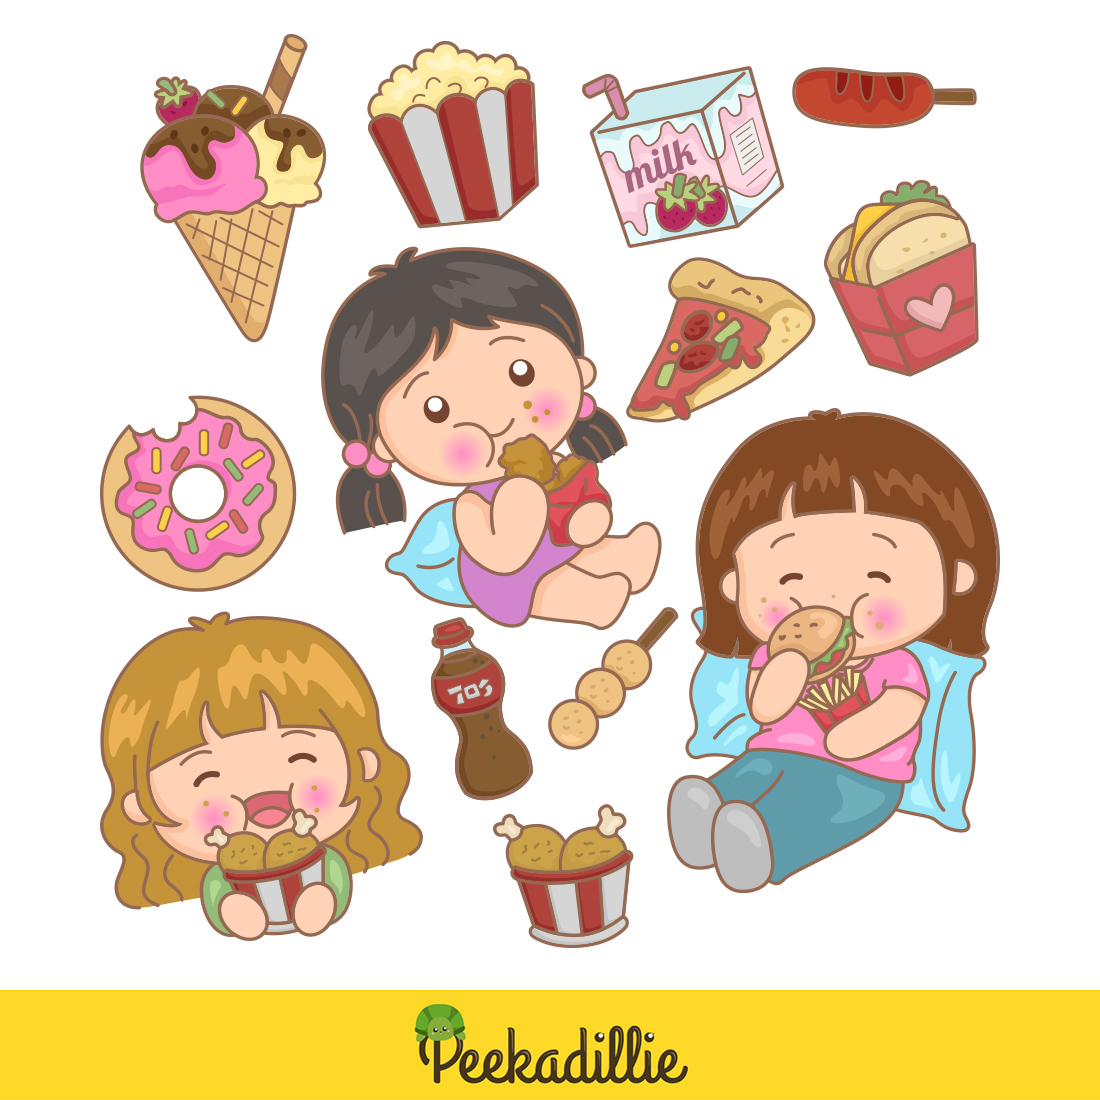 Cute and Funny Little Girl Kids Love and Like To Eat Food and Junk Food Drink Feel Happy Ice Cream Popcorn Pizza Sandwich Donut Milk Fried Chicken Cola Illustration Cartoon Clipart Vector preview image.